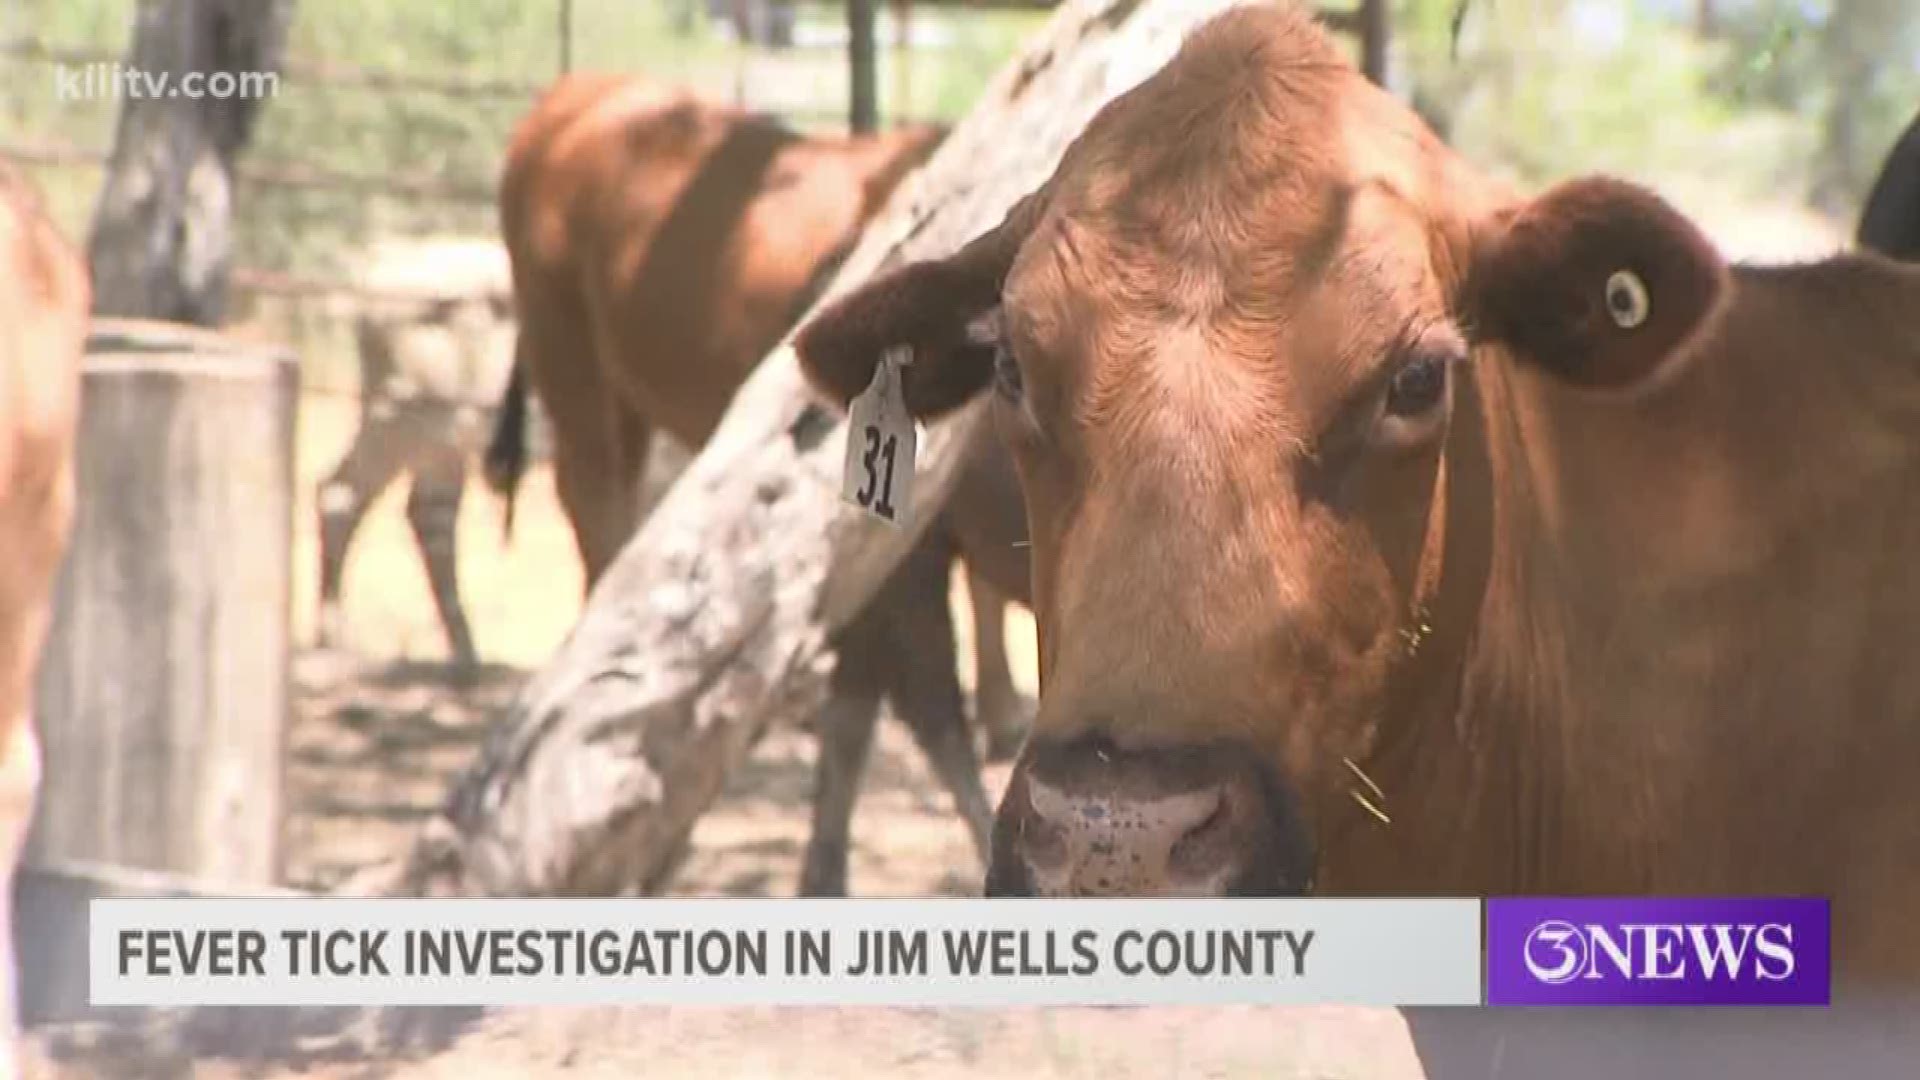 Investigation launched after fever tick found on calf in Jim Wells County |  